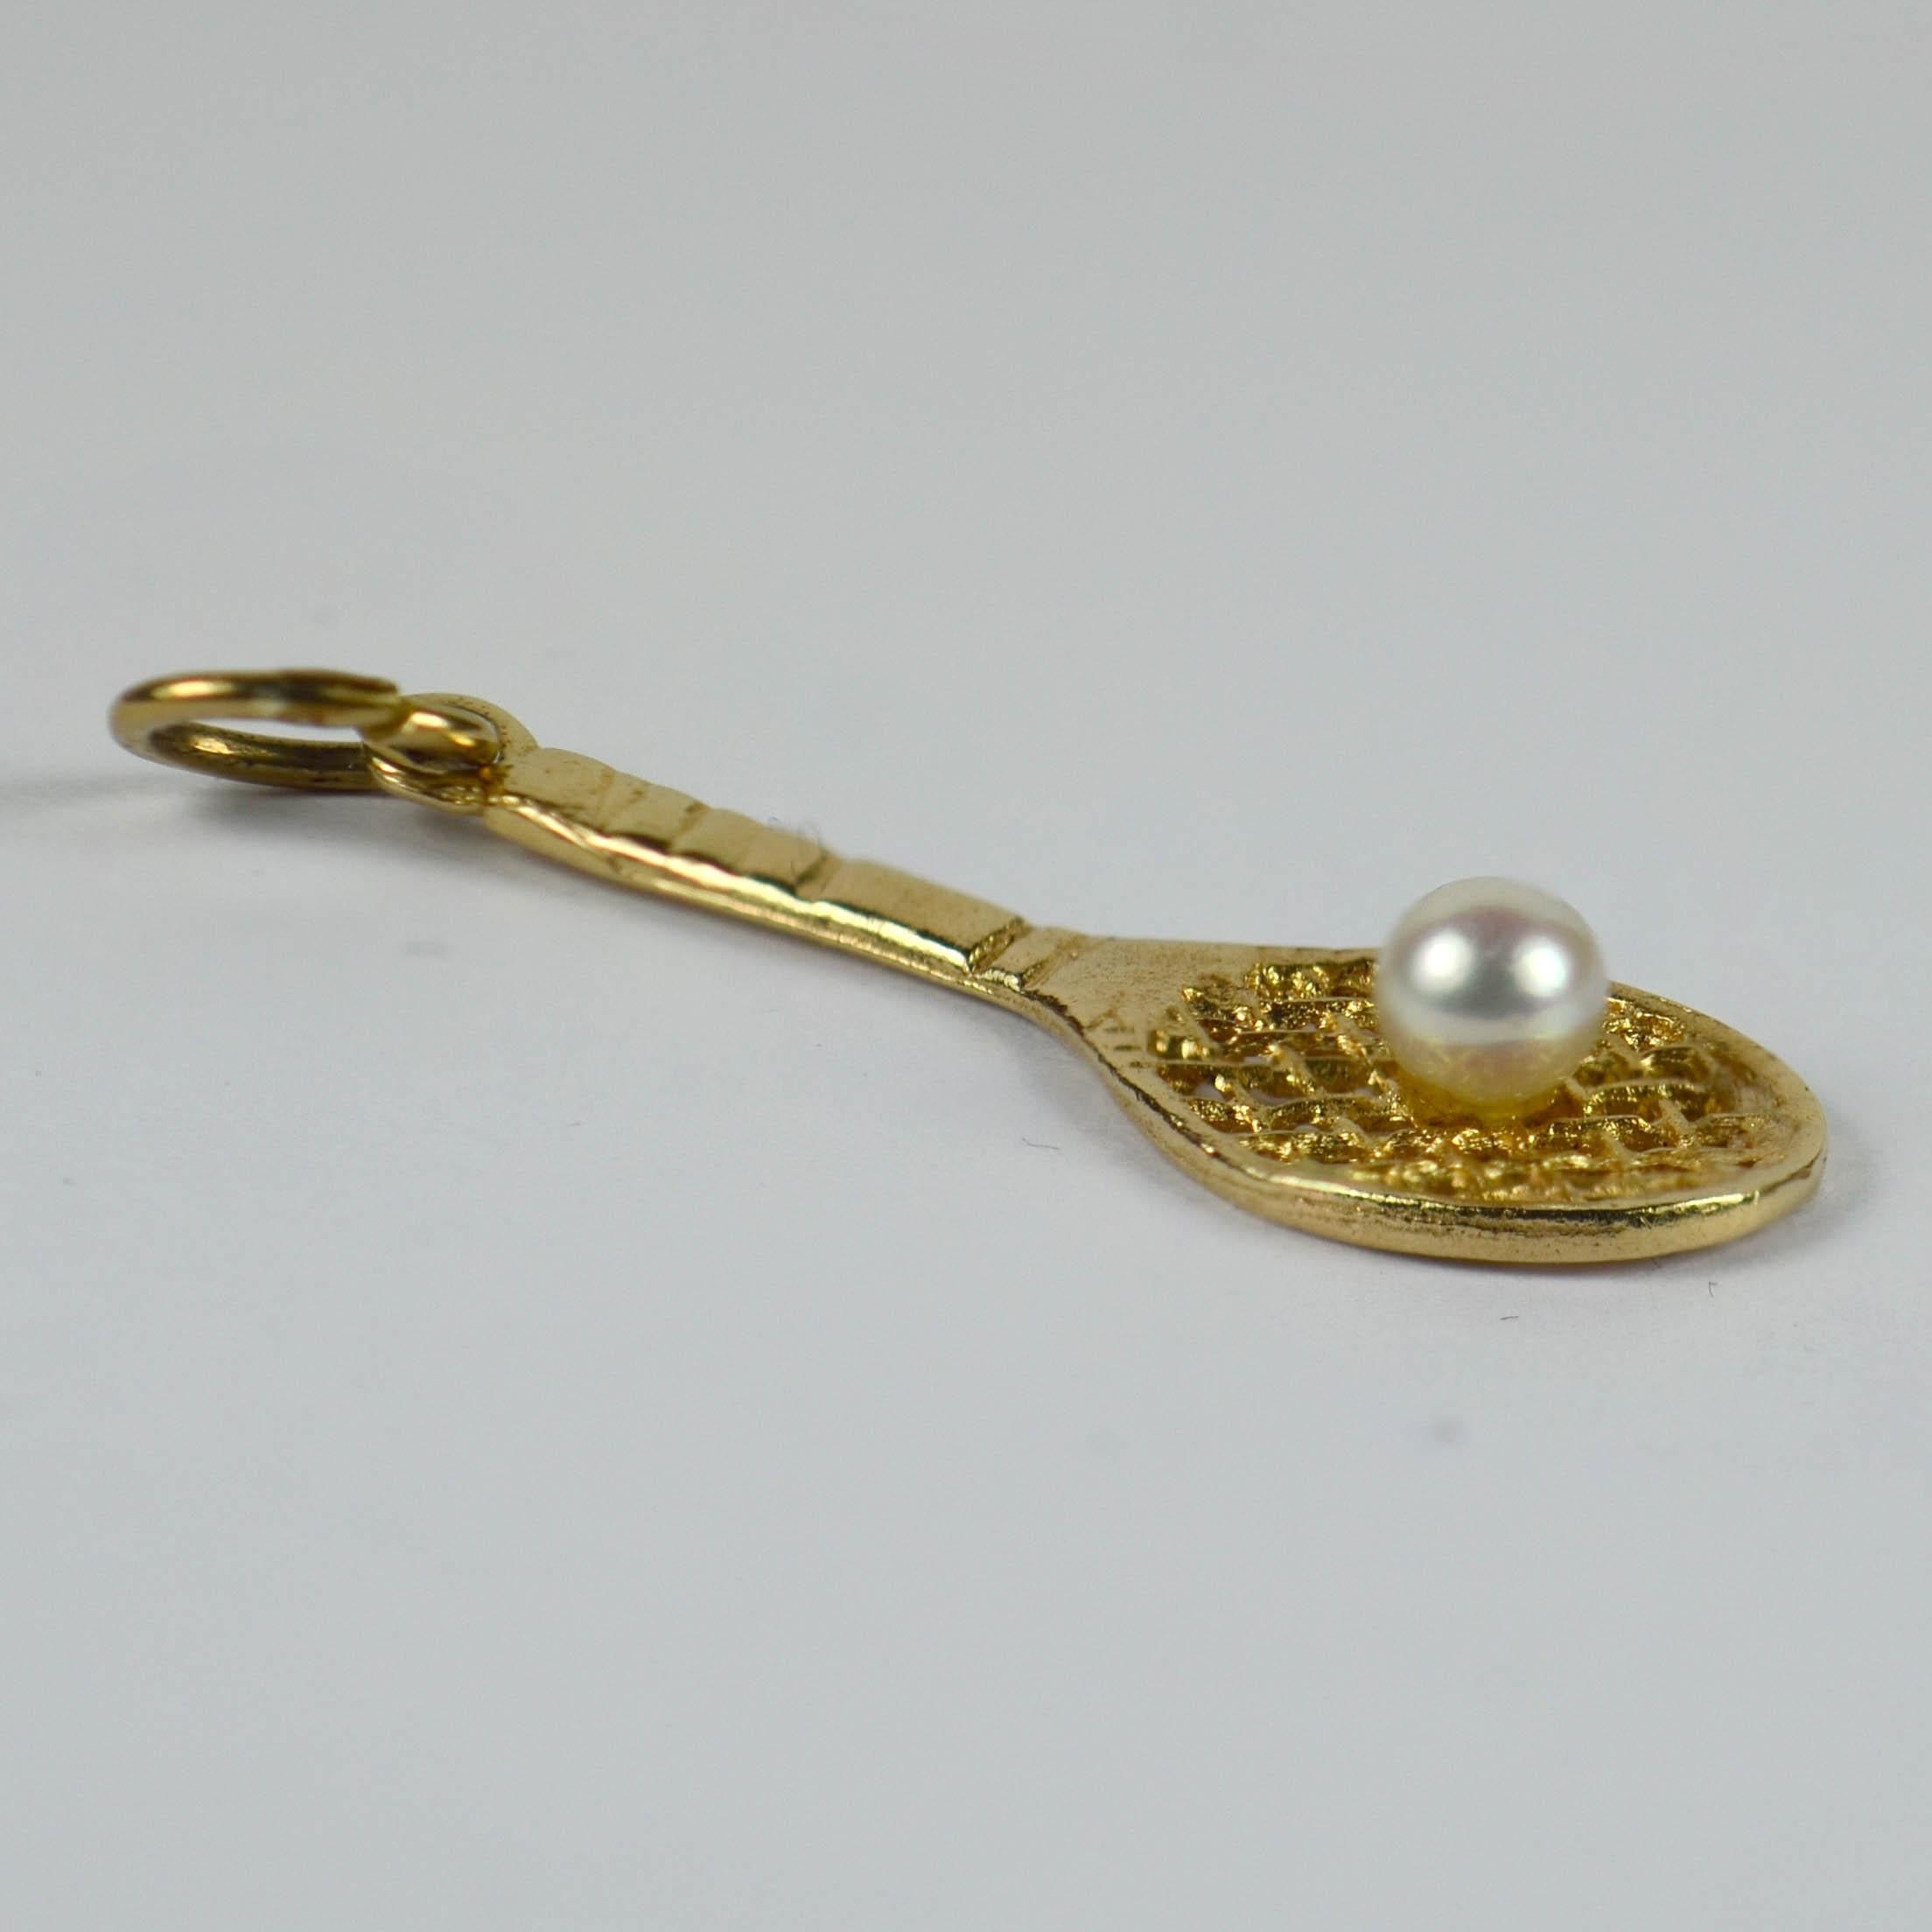 A 14 karat yellow gold charm pendant designed as a tennis racket with a white cultured pearl ball.

Dimensions: 3.5 x 1.1 x 0.6 cm
Weight: 1.29 grams